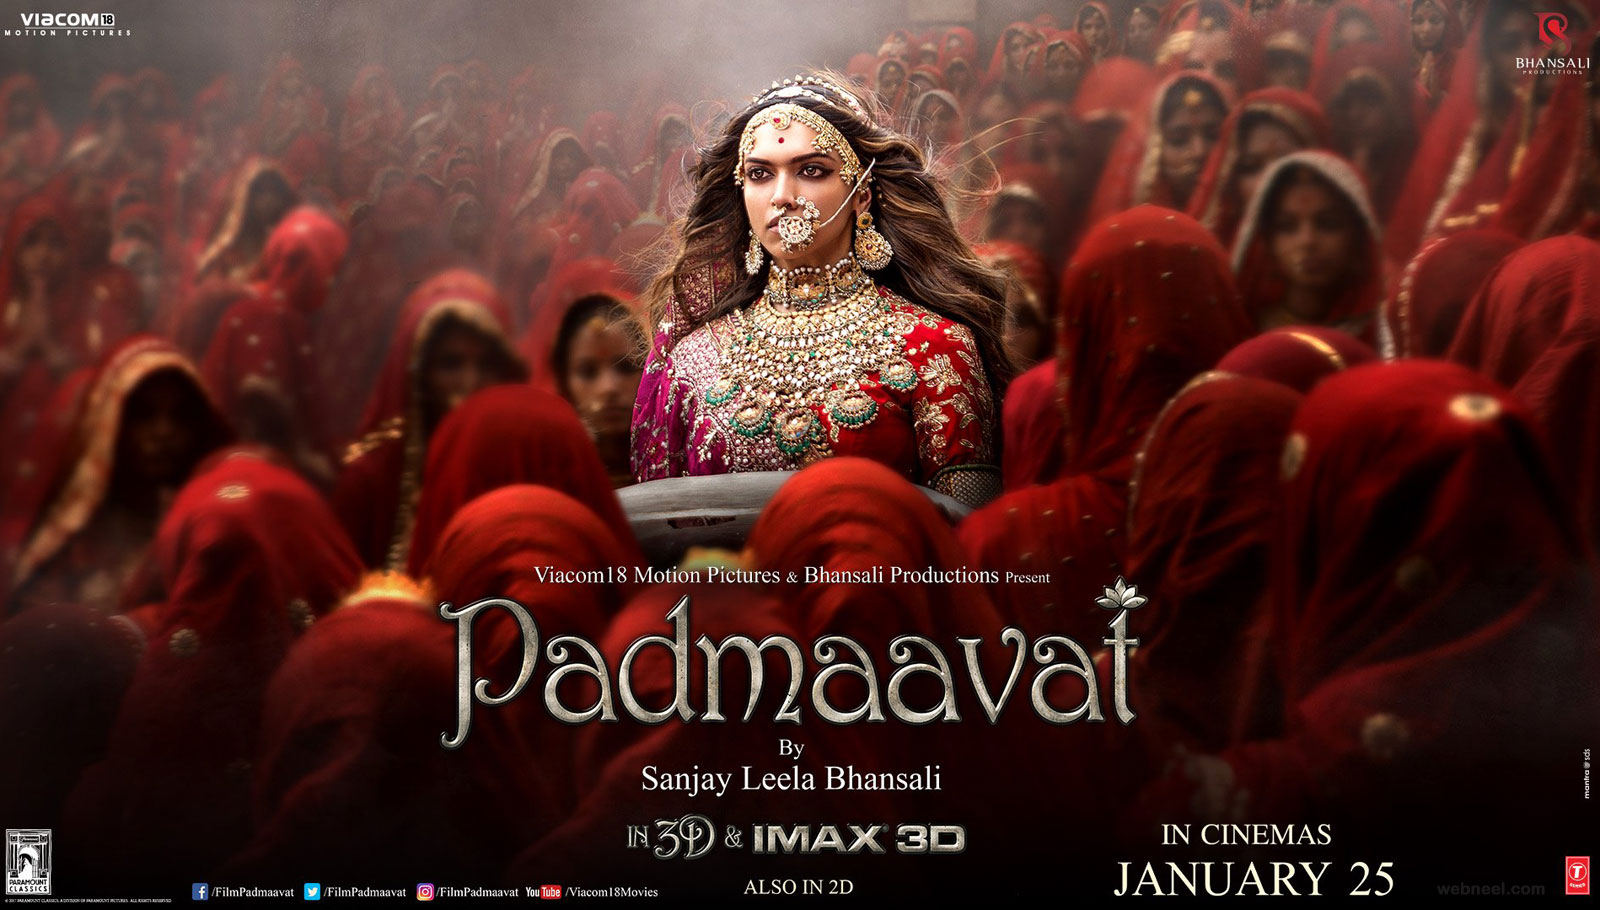 1-india-movie-poster-design-bollywood-padmaavat